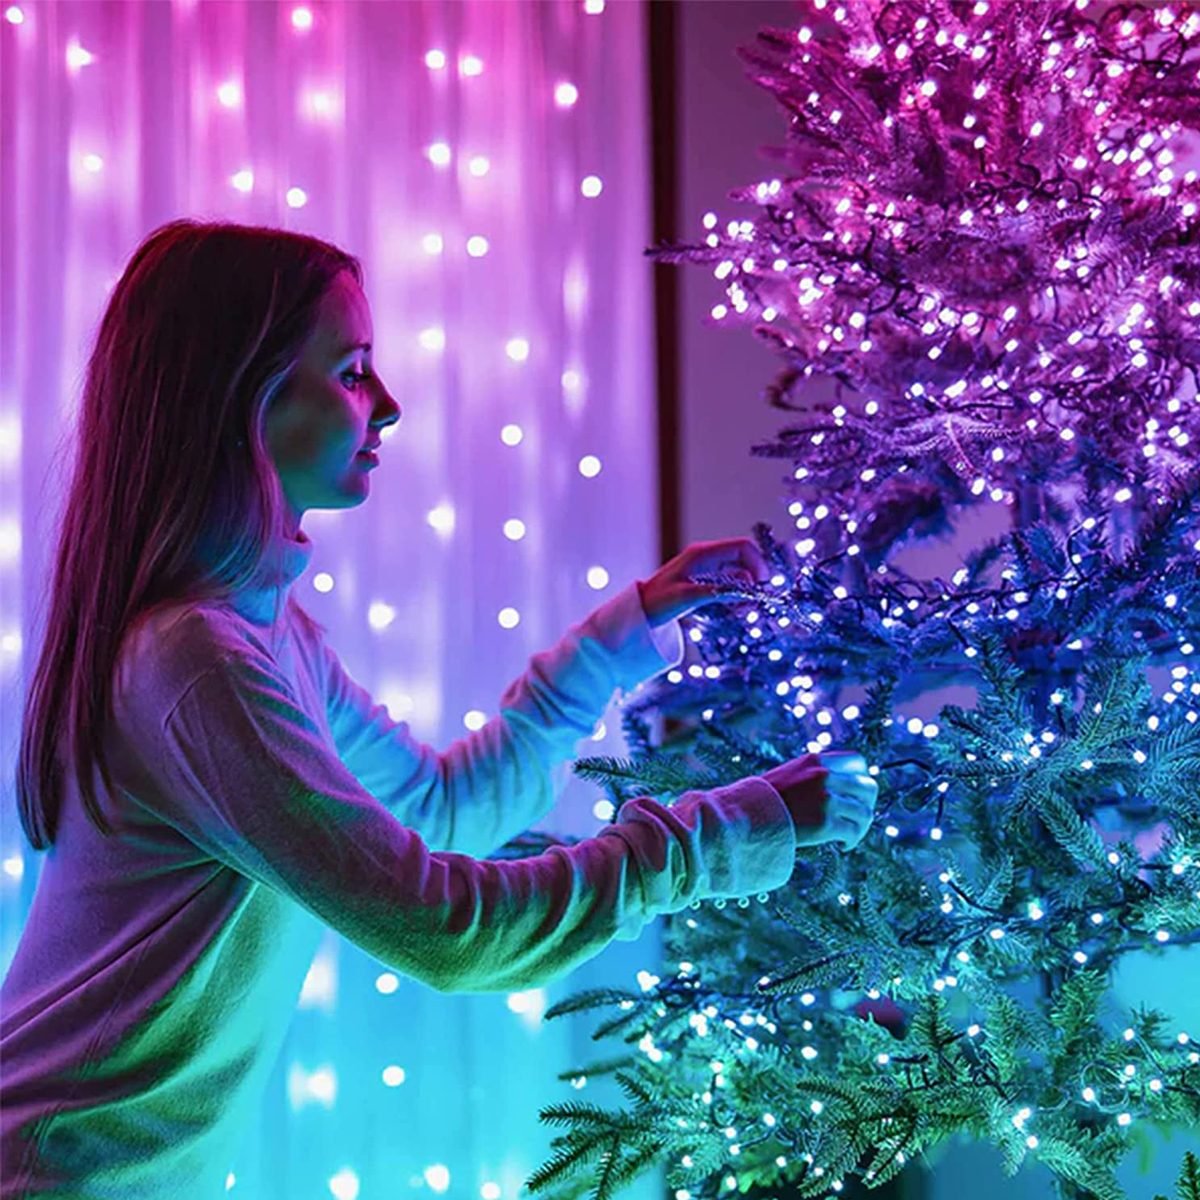 https://www.familyhandyman.com/wp-content/uploads/2022/10/Twinkly-Smart-Decorations-600-LED-RGB-157.5-Foot-Multicolor-LED-Indoor-and-Outdoor-App-Controlled-Holiday-String-Lights-ecomm-amazon.com_.jpg?fit=700%2C700